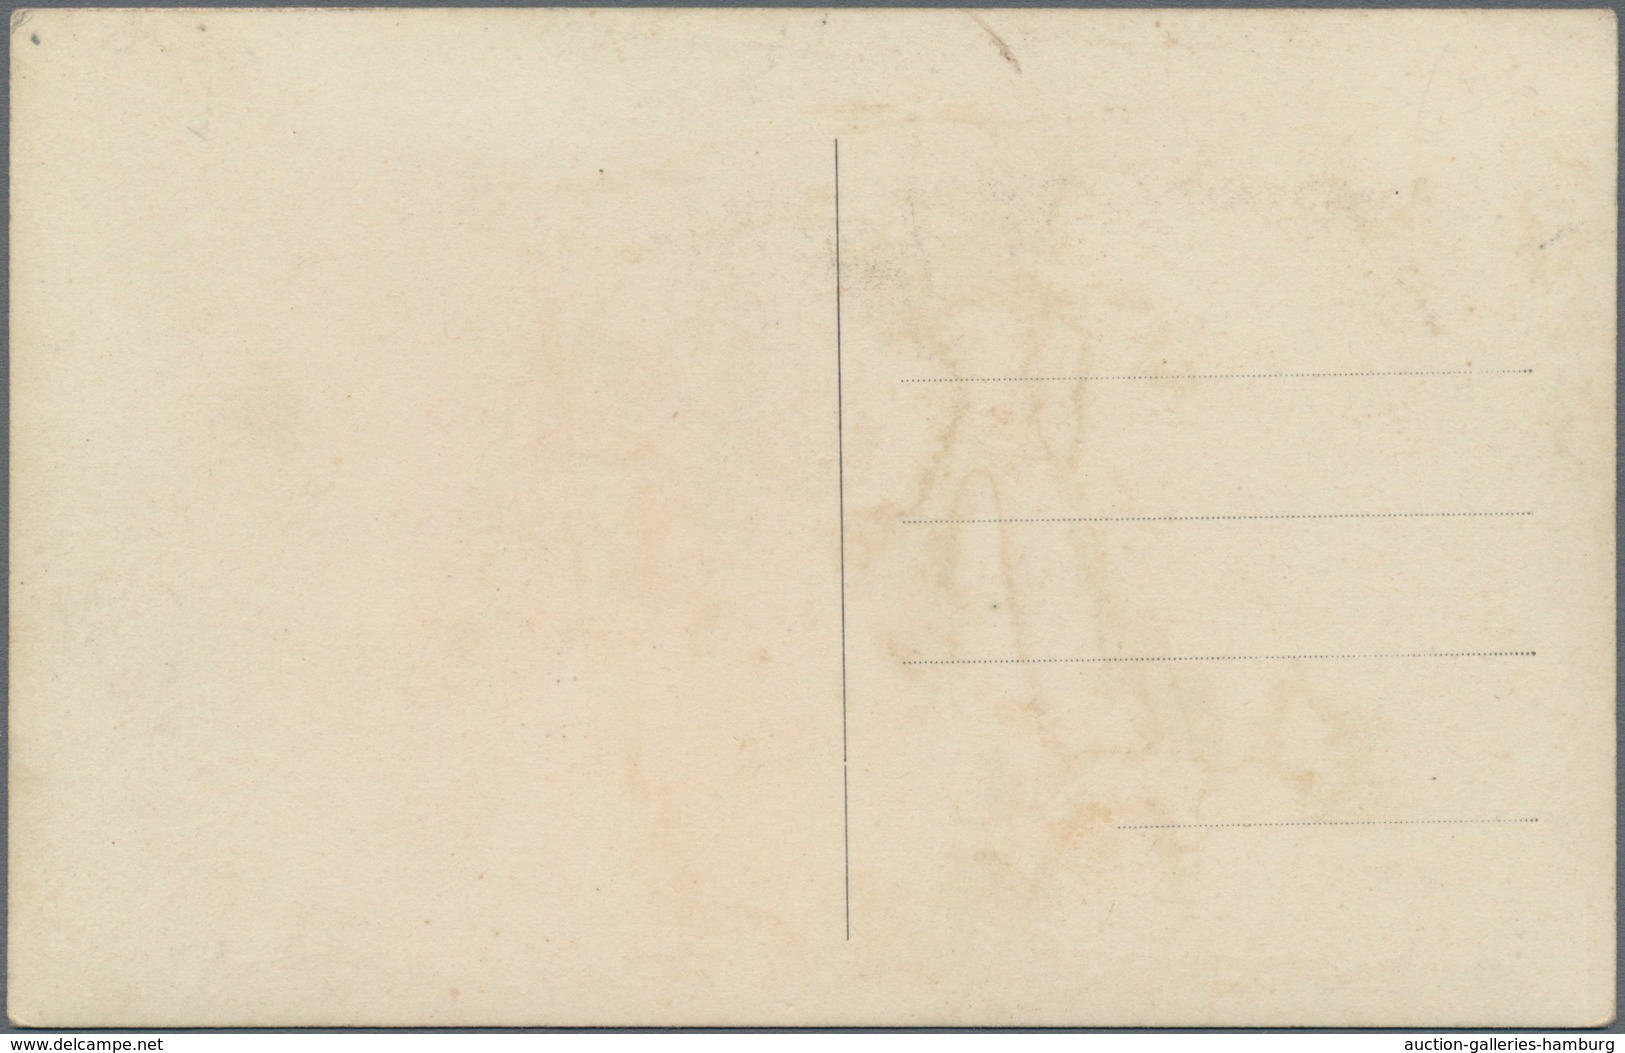 Curacao: 1917, 12 1/2 C blue postal stationery envelope, uprated with 10 C rose, sent registered fro